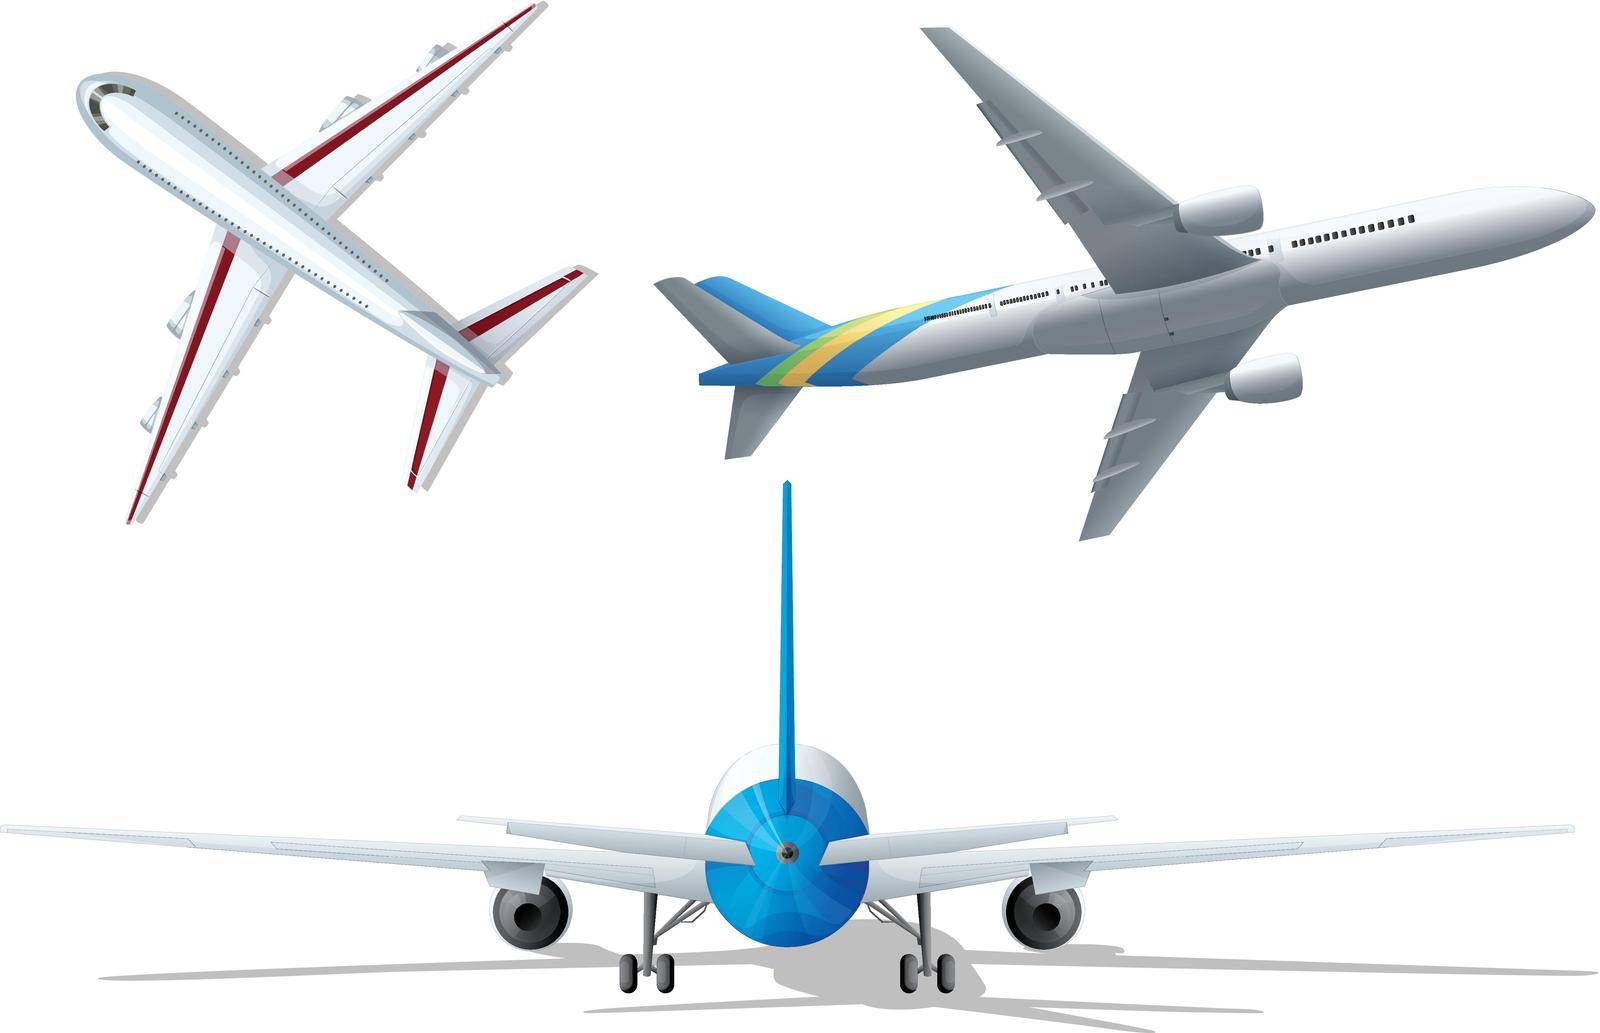 Different angle of the airplanes illustration